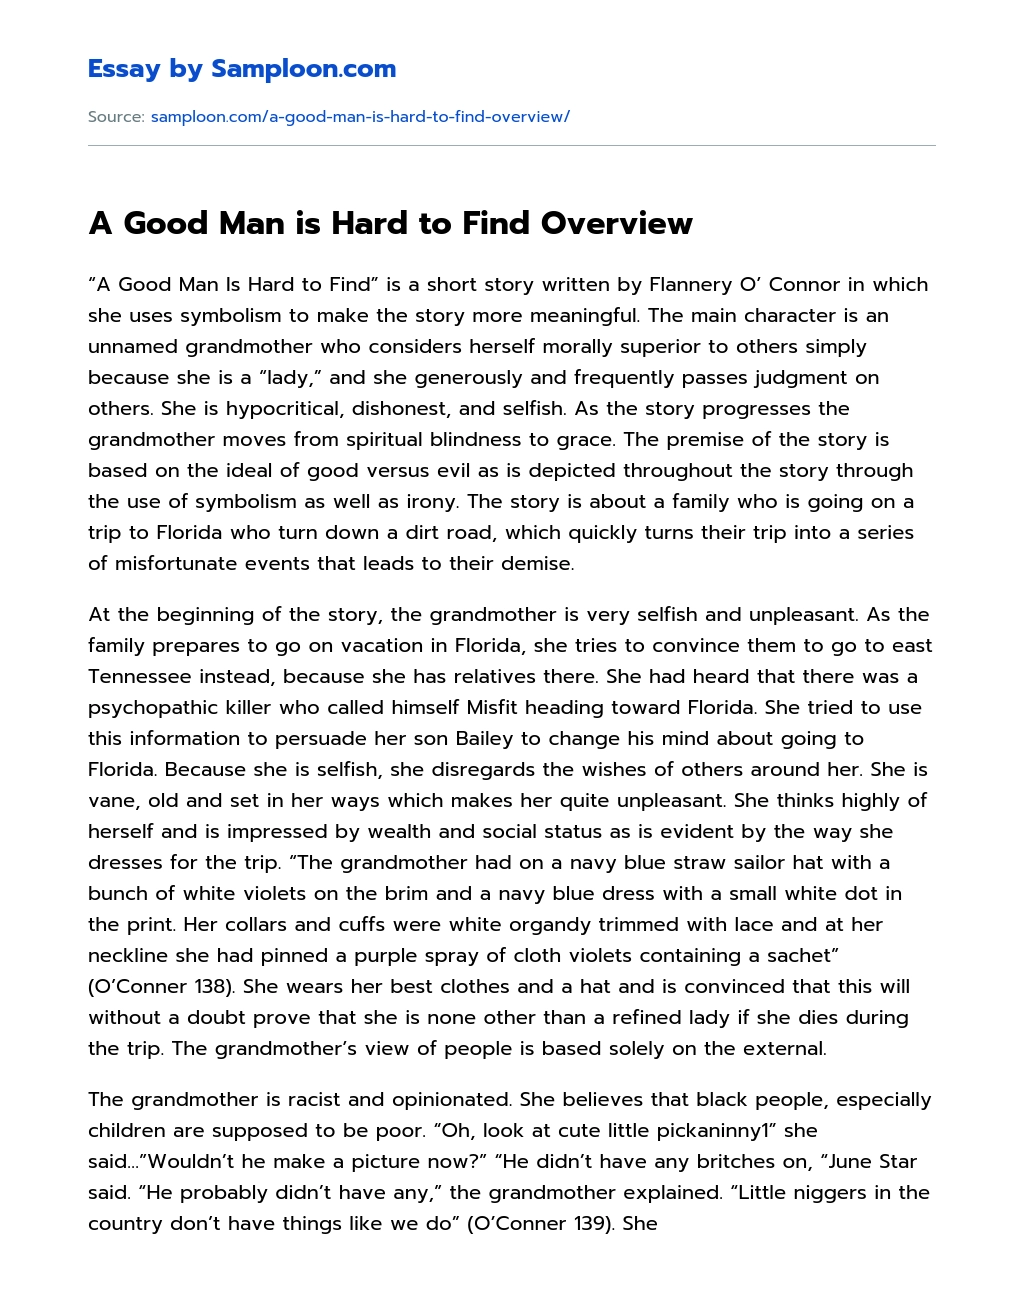 A Good Man is Hard to Find Overview Summary essay